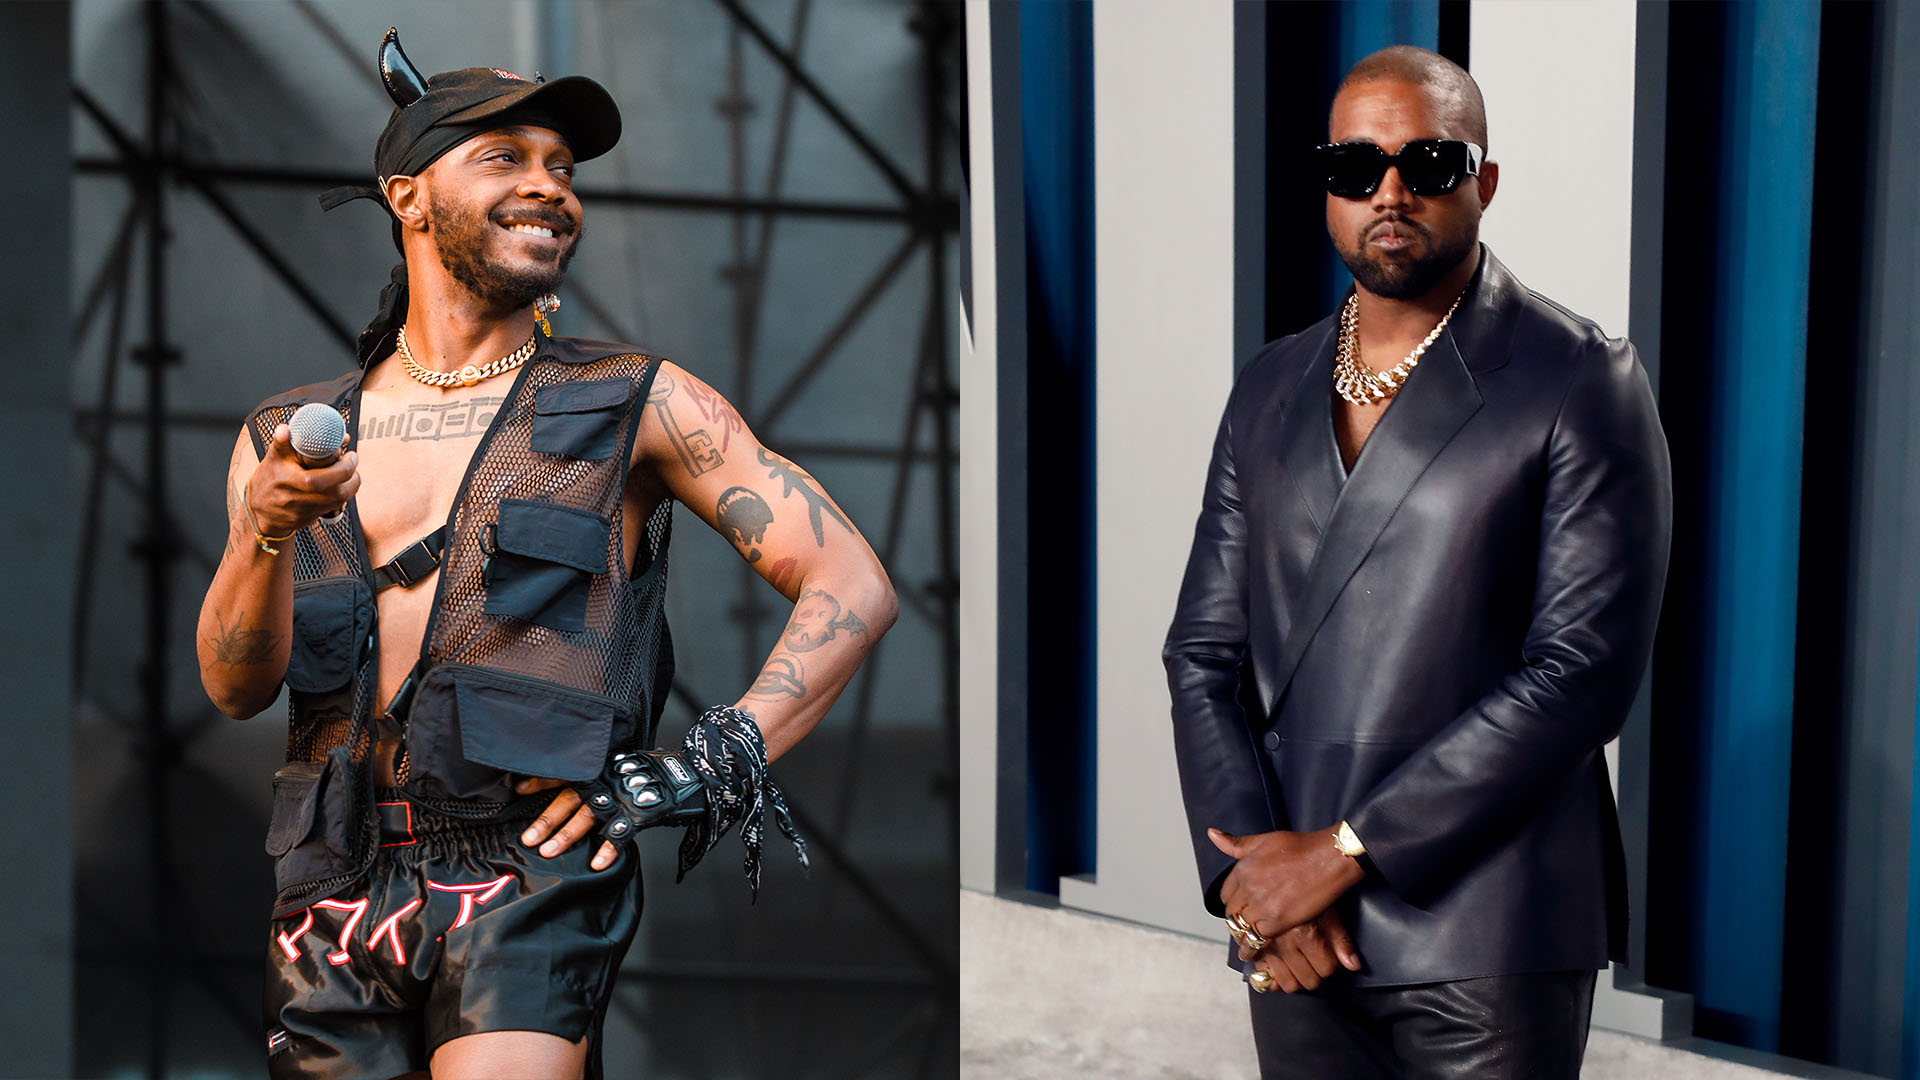 JPEGMAFIA Hints At Kanye West Collaboration After "Mid" Rant